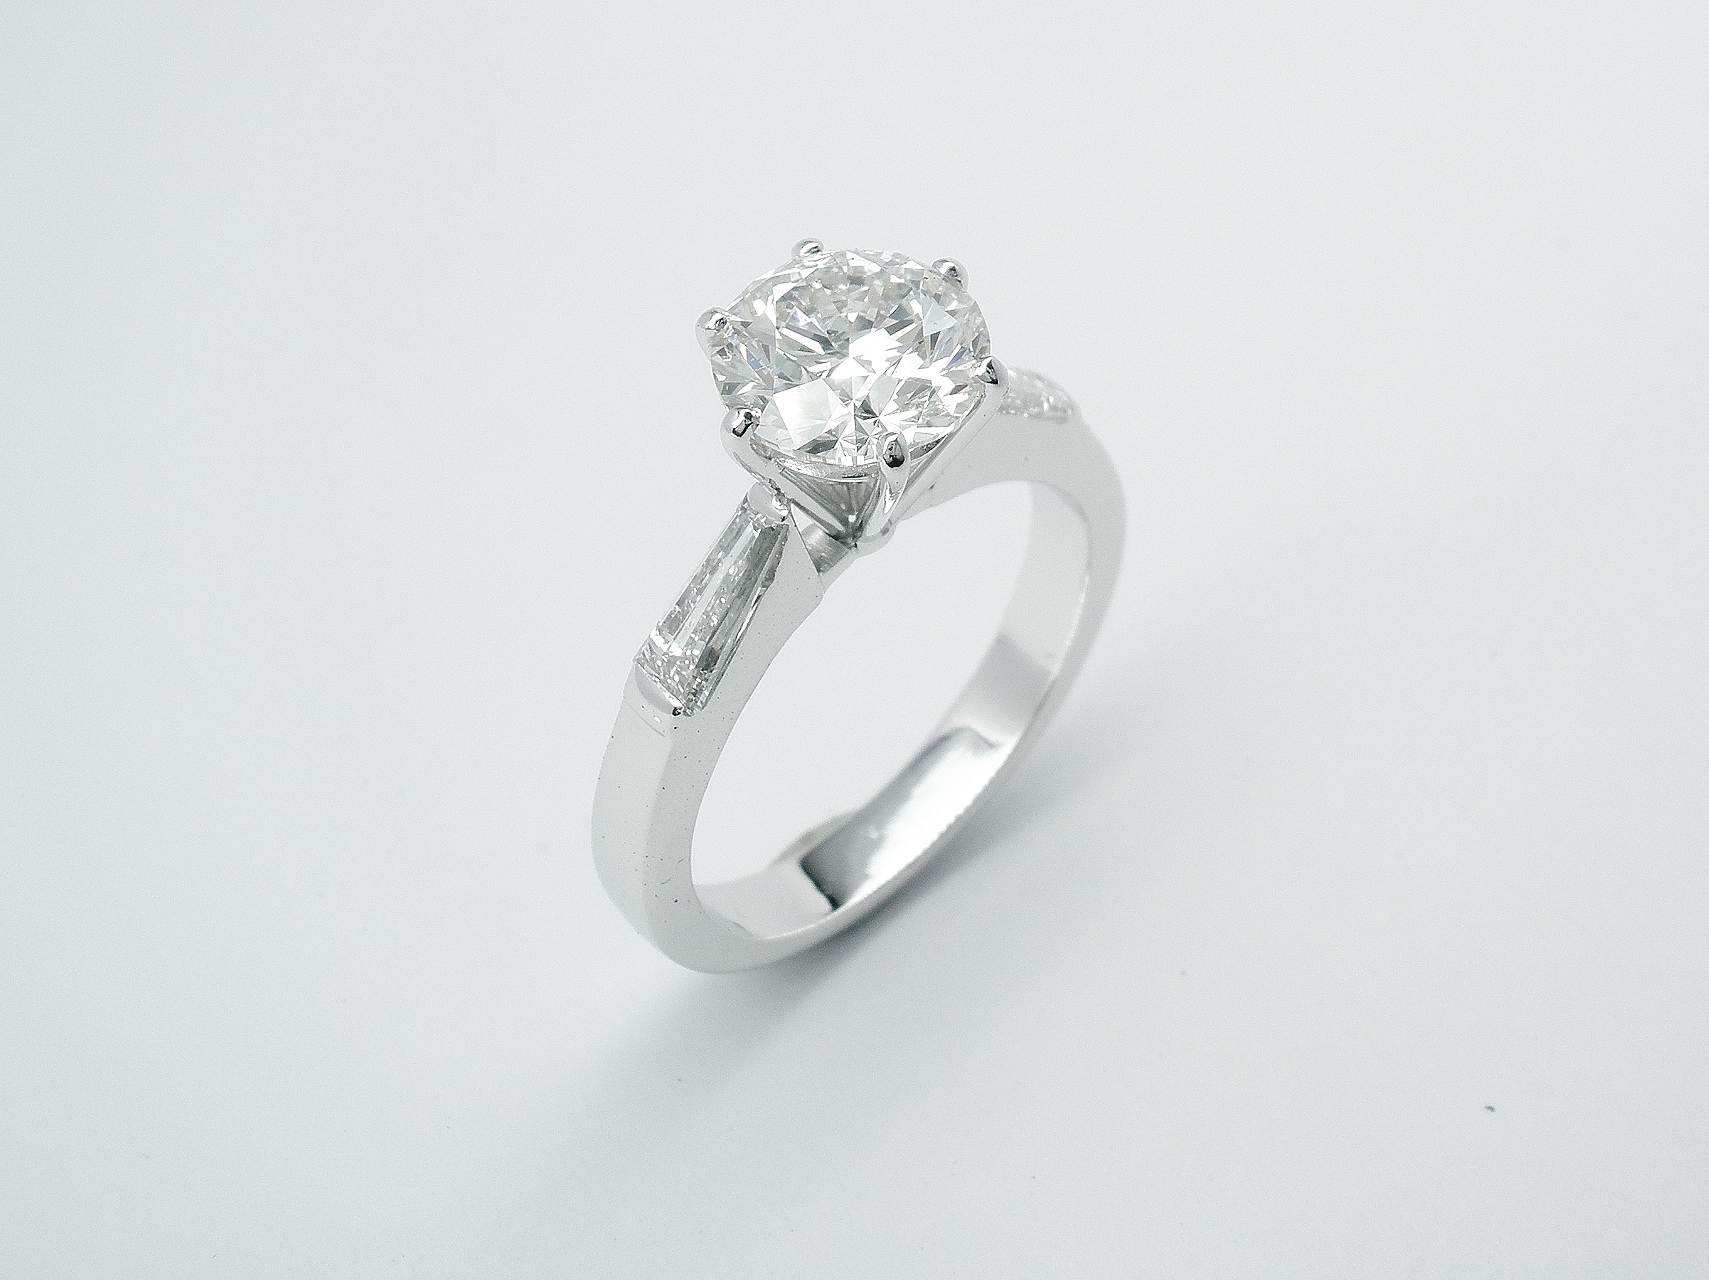 After The 1.50cts. round brilliant cut diamond set in a handmade higher platinum setting inserted successfully between the original tapered baguette shouldered 18ct white gold mount.